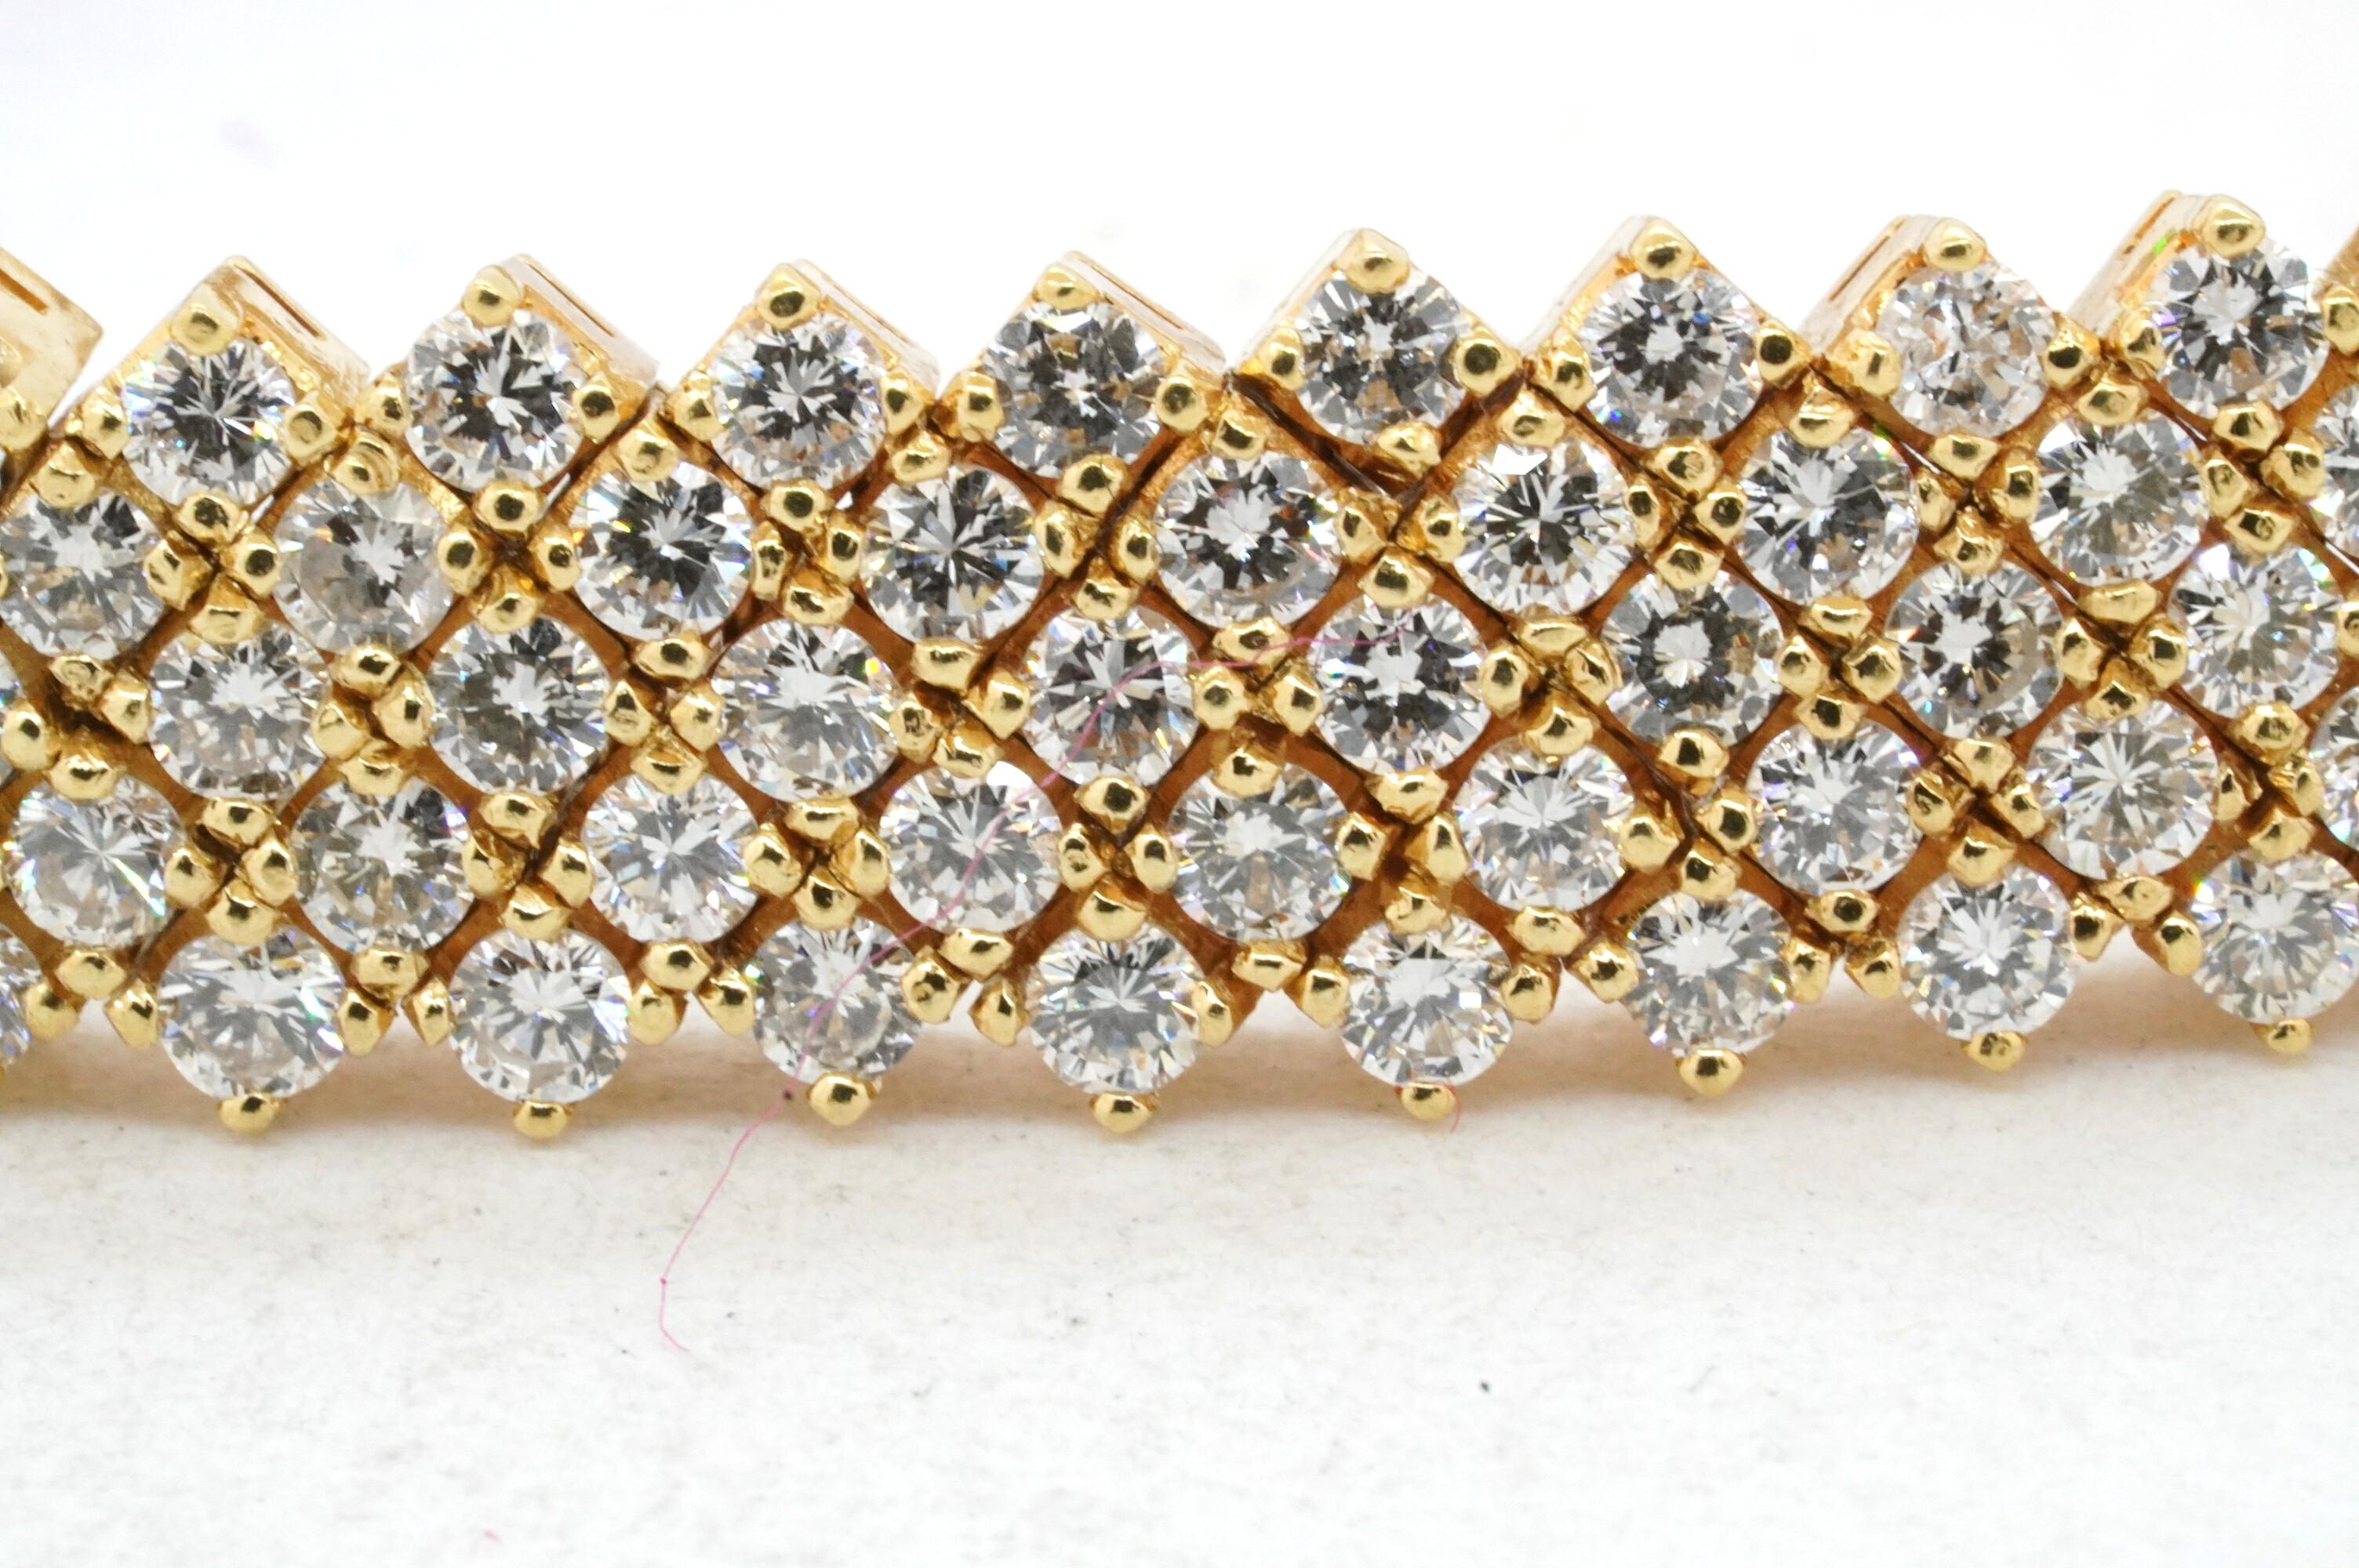 18k yellow gold 14ct VS clarity diamond five row line bracelet. This lovely brcelet is made from solid 18k yellow gold and features approx. 14cts worth of sparkling white diamonds. The diamonds are round cut and individually set, they have excellent